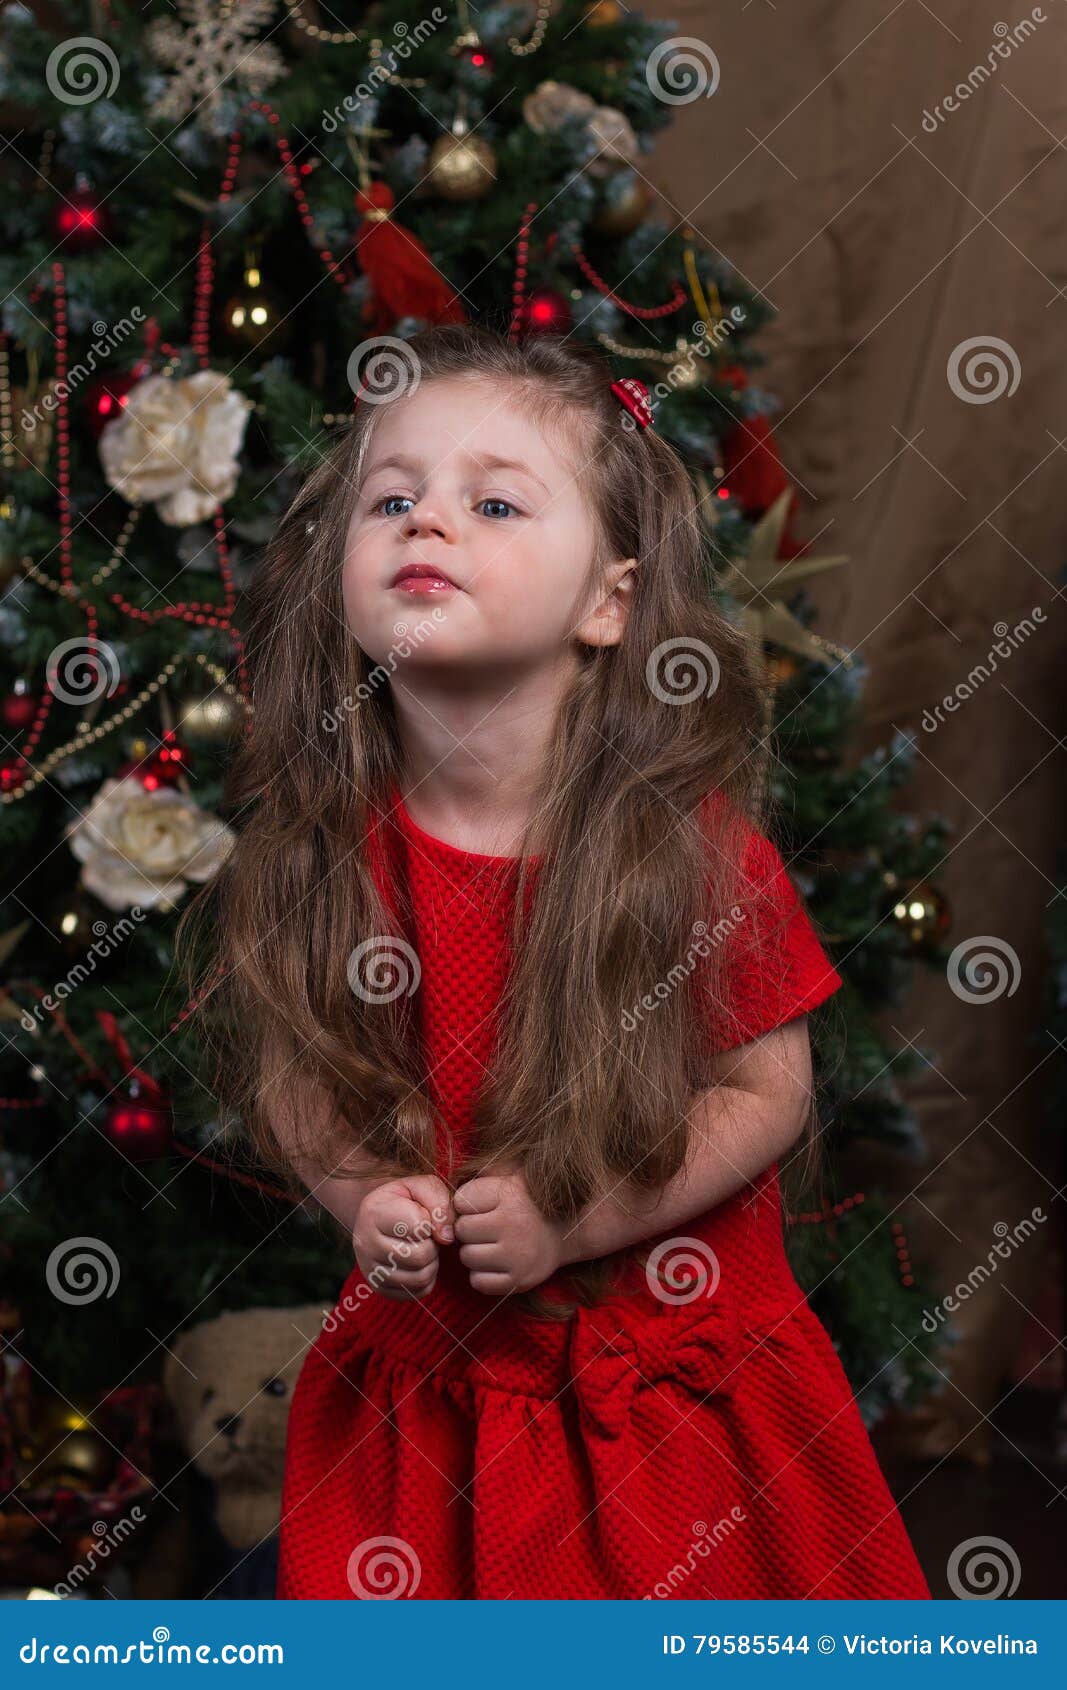 Pretty Girl with Long Hair in a Red Dress in the Feast of Christmas ...